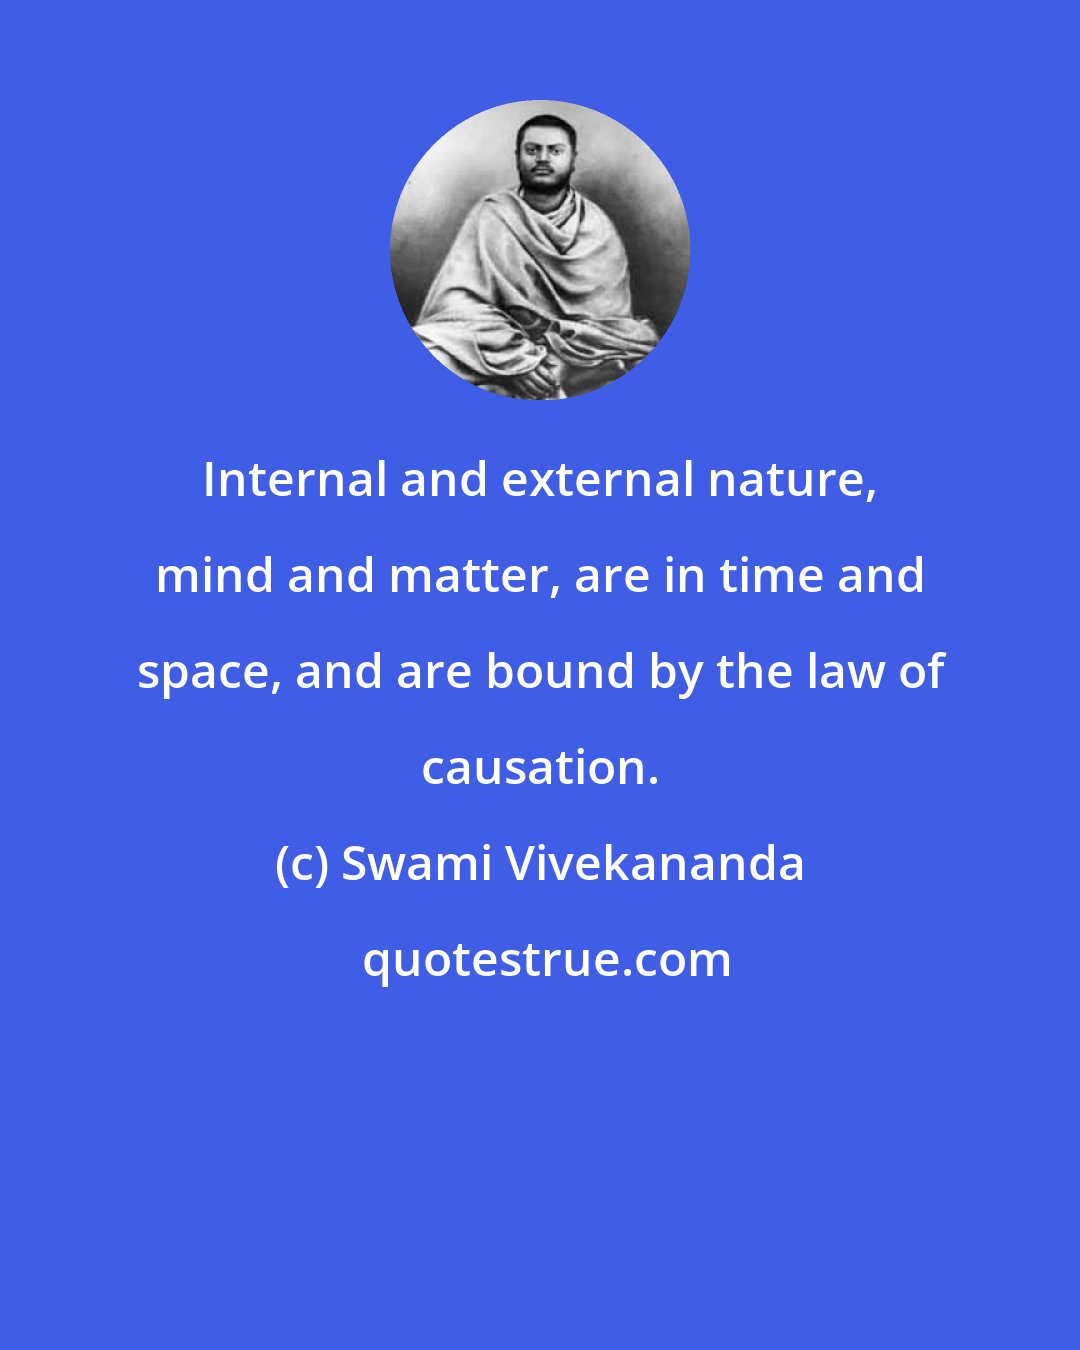 Swami Vivekananda: Internal and external nature, mind and matter, are in time and space, and are bound by the law of causation.